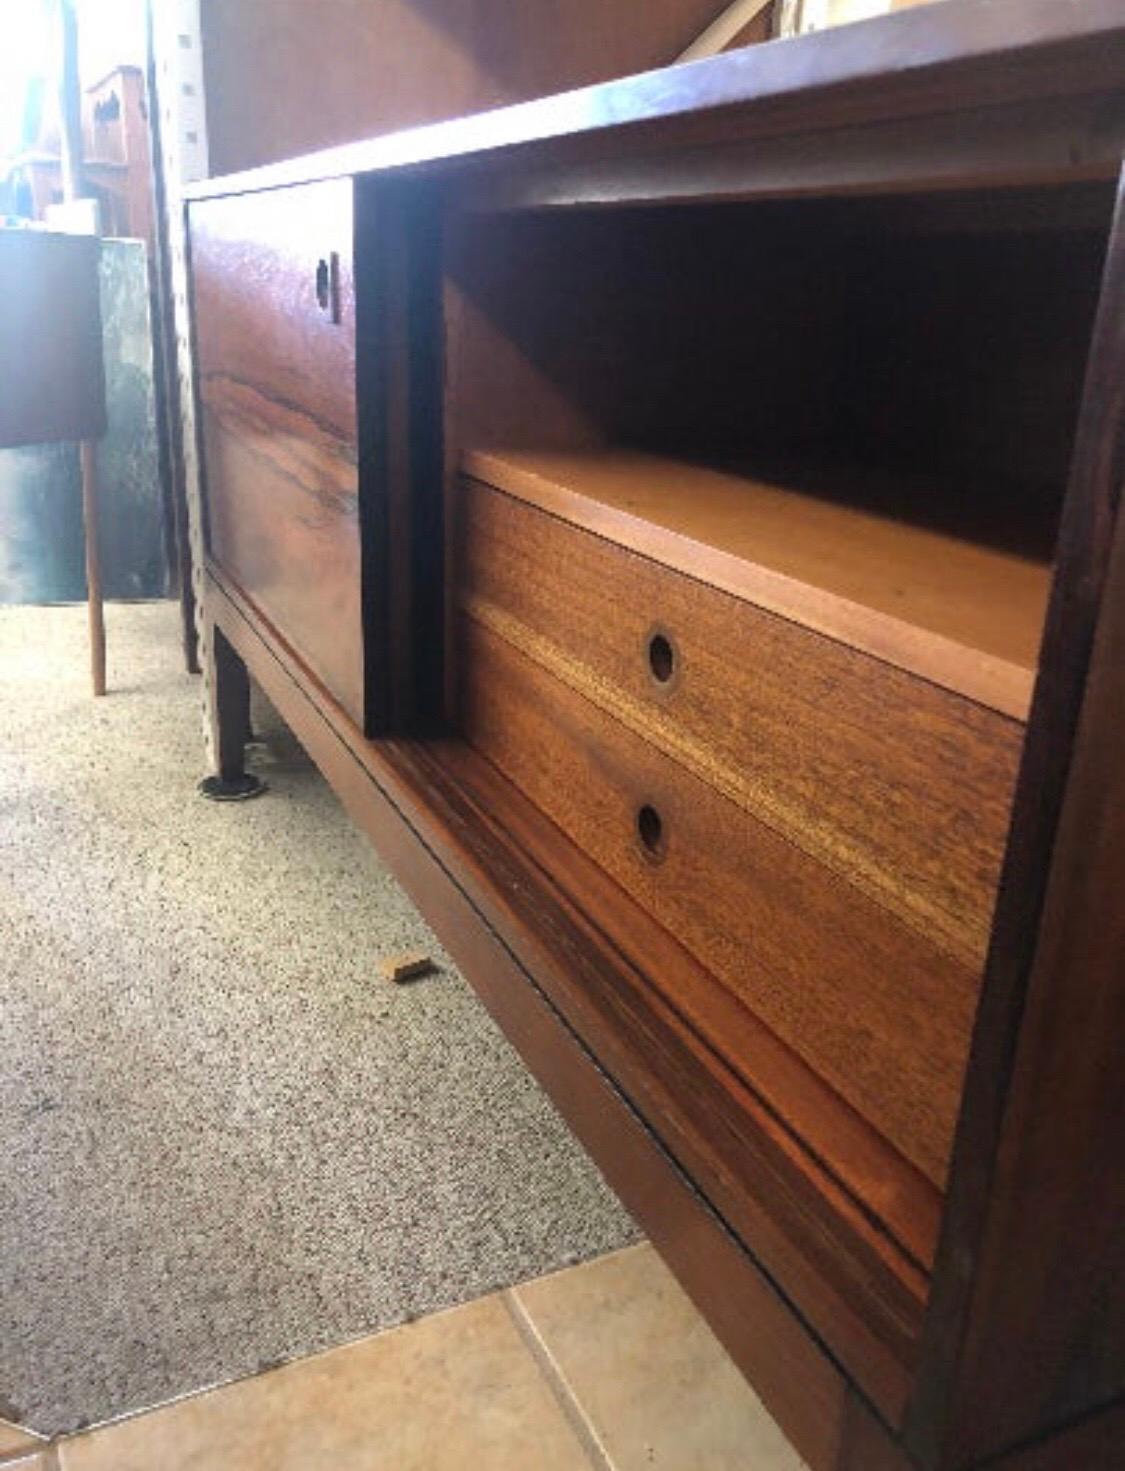 A functional Danish rosewood cabinet credenza. Accessed by two sliding doors the interior is divided into two compartments. The compartments are sized to hold records or any other media items.